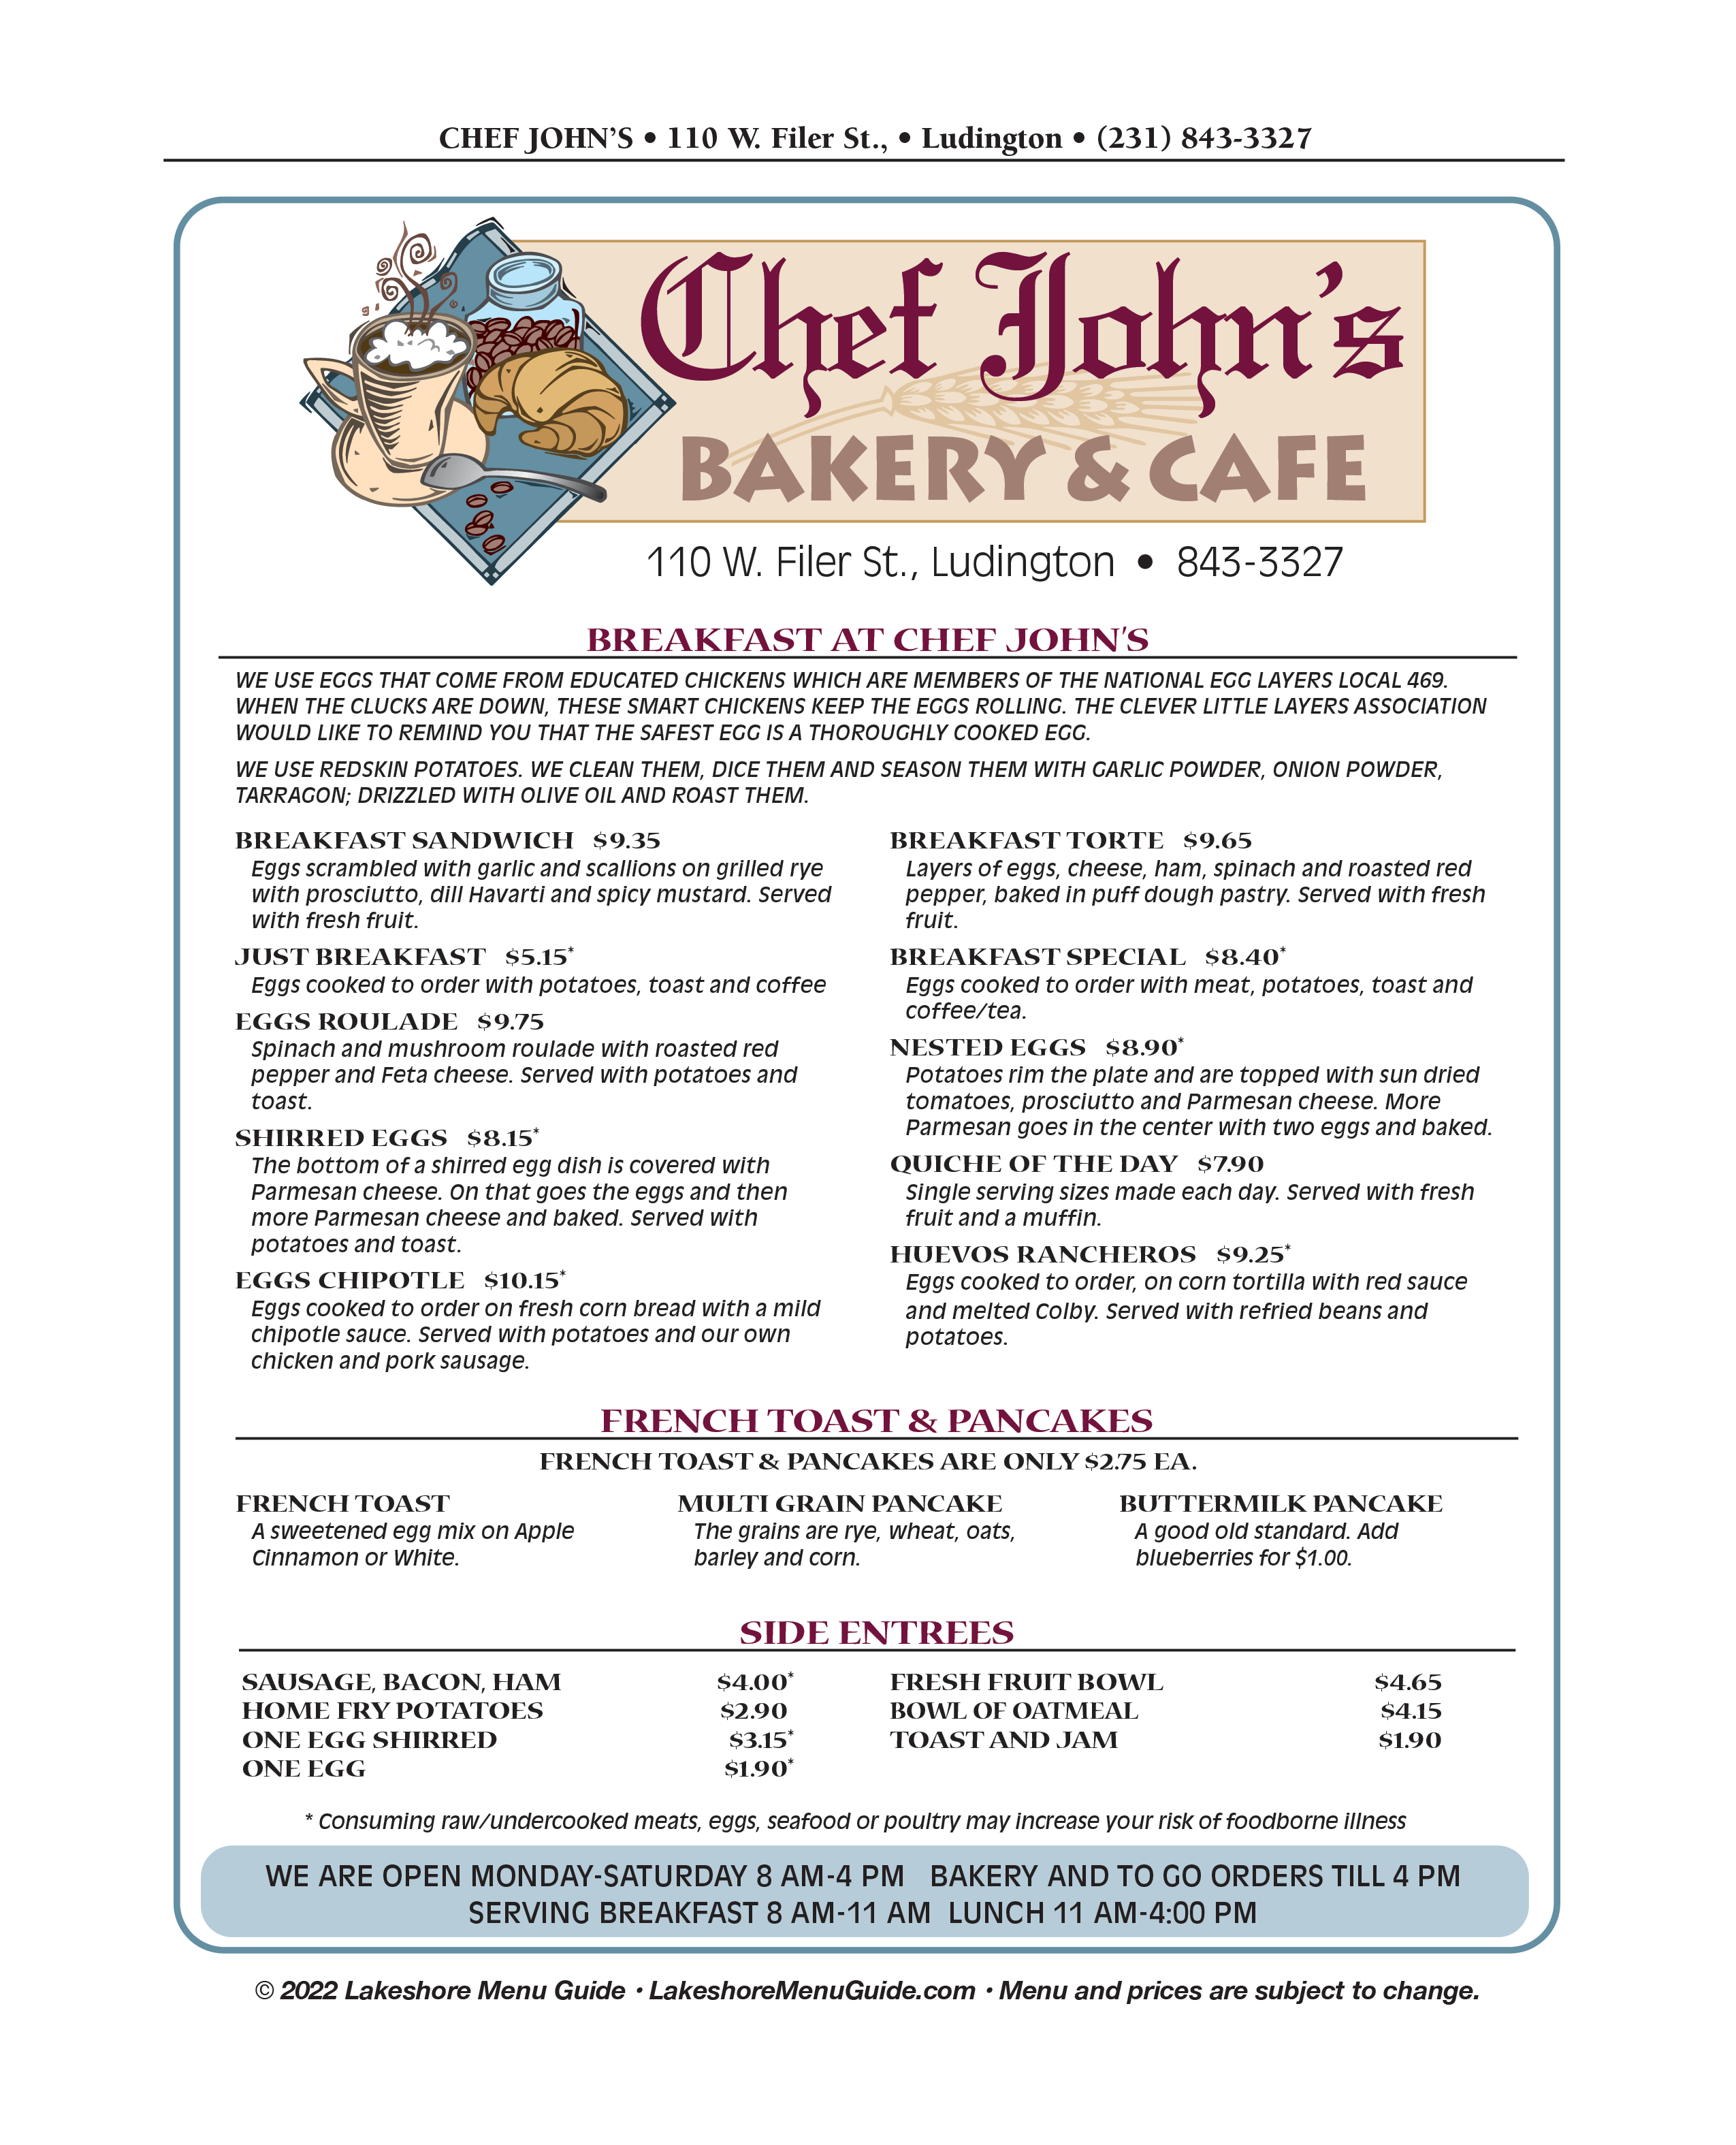 Menu for Chef John's Bakery and Cafe in downtown Ludington from the Lakeshore Menu Guide